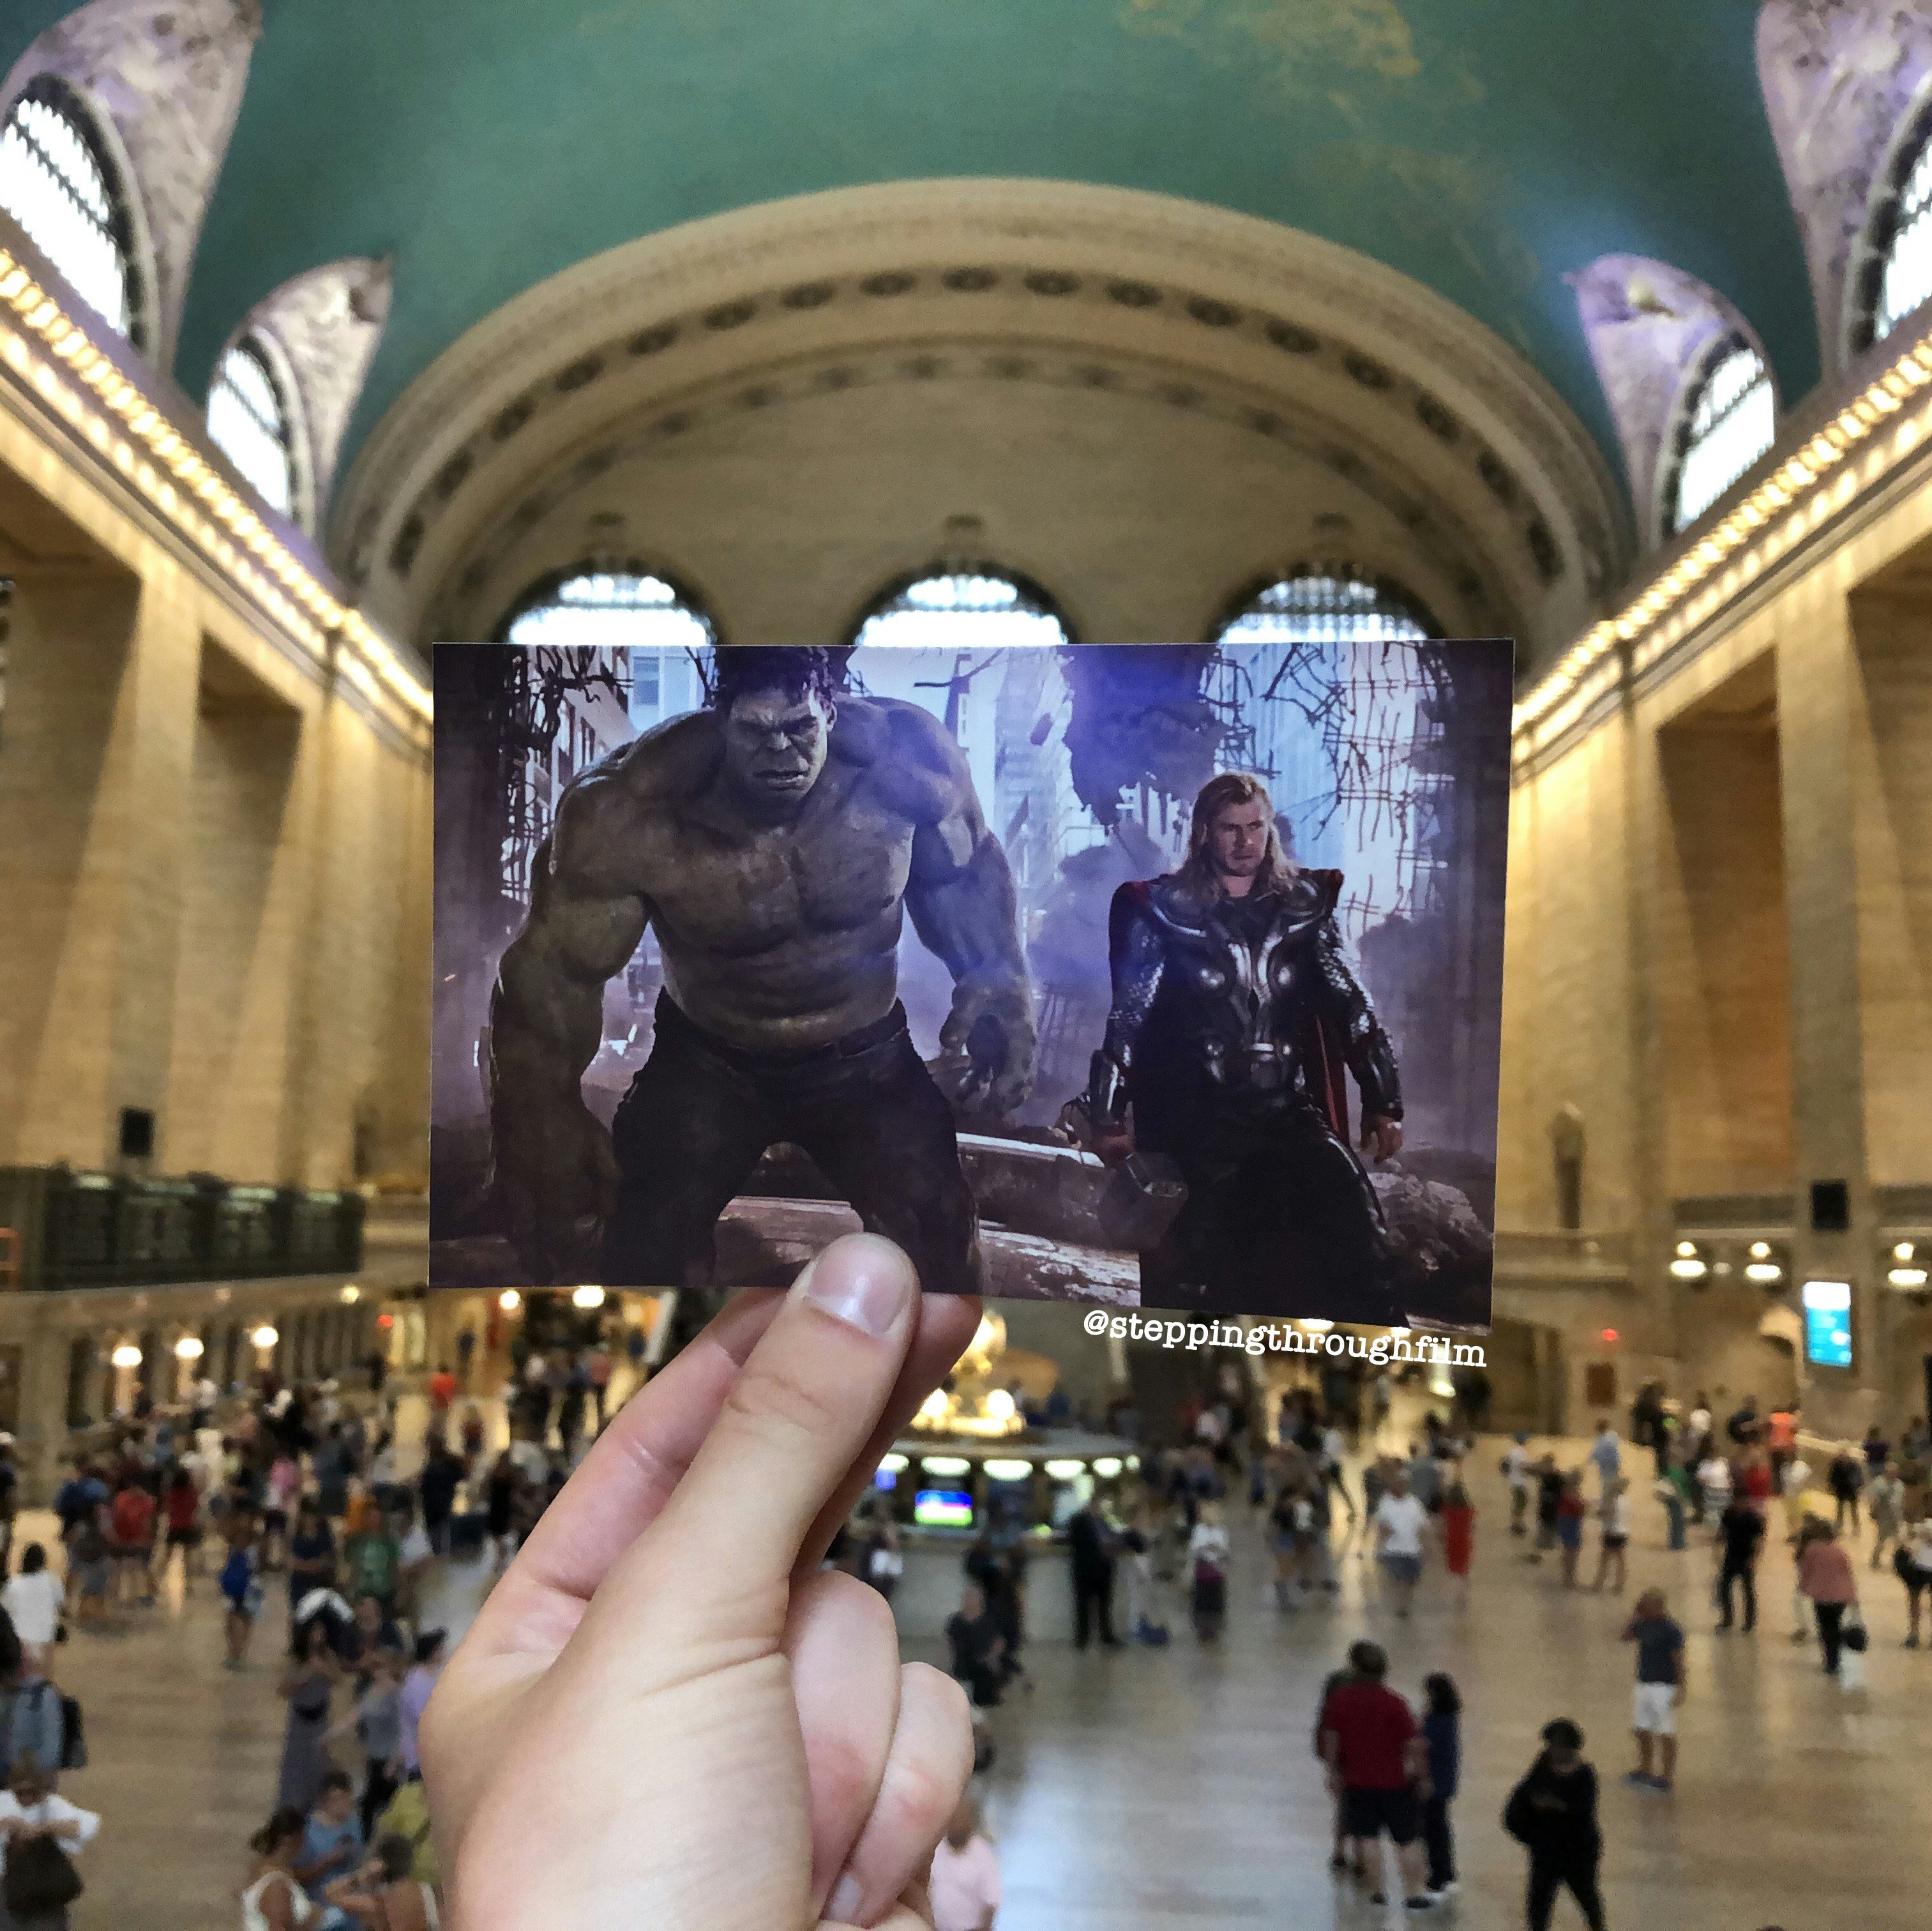 A shot of Thor and Hulk from the first Avenger movie in New York